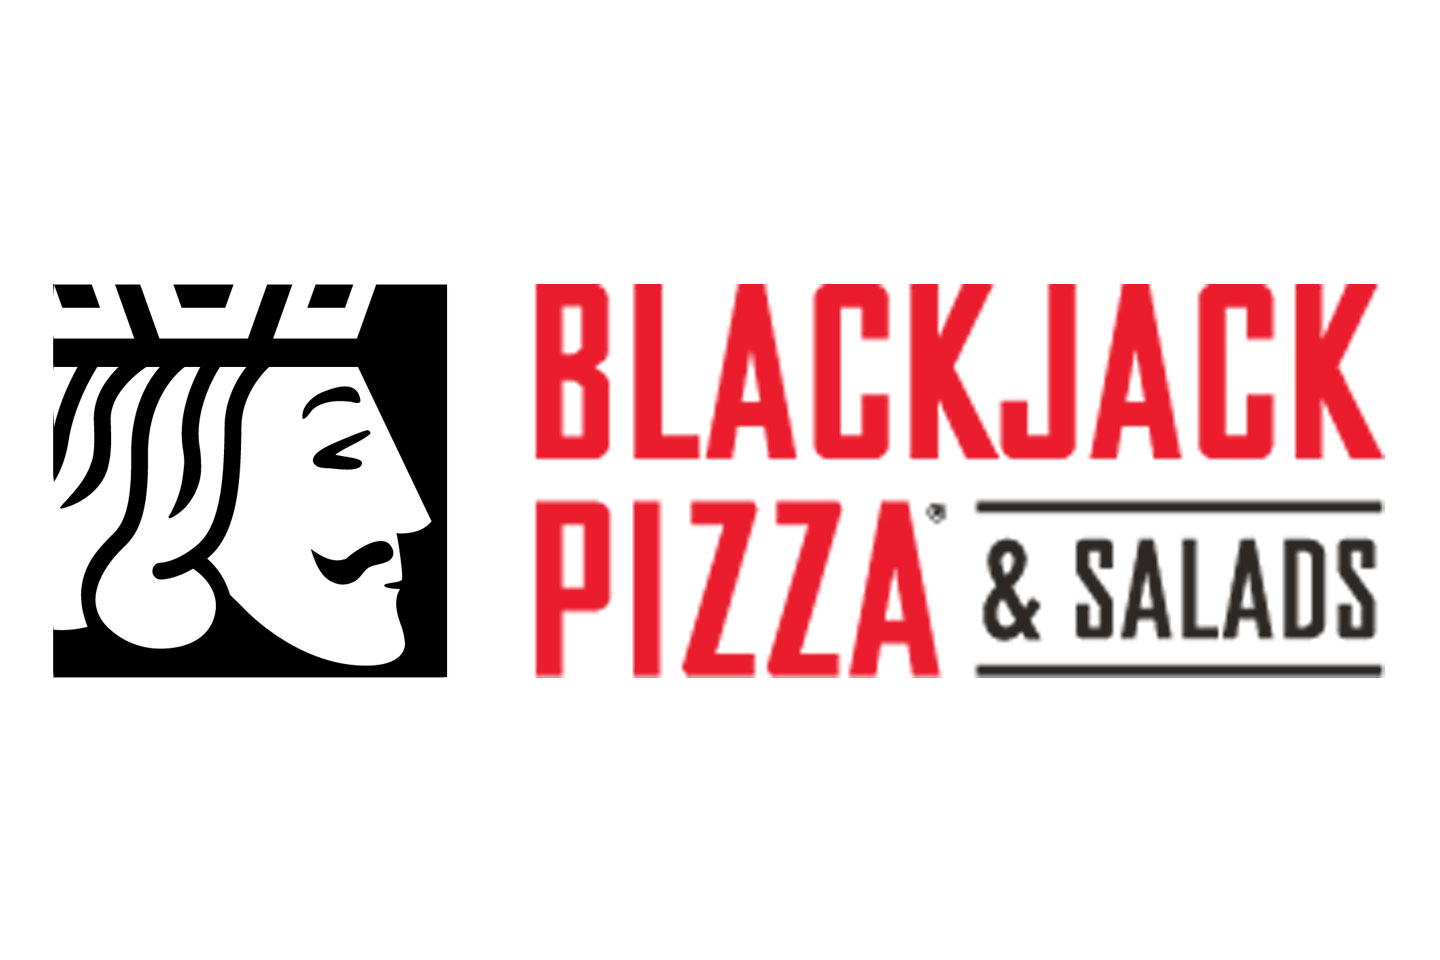 Our handcrafted products are made in house from our pizzas and breads to our salads dressings and success. We care to provide you with nothing but the best freshest ingredients and never frozen cheese blends. https://blackjackpizza.com/